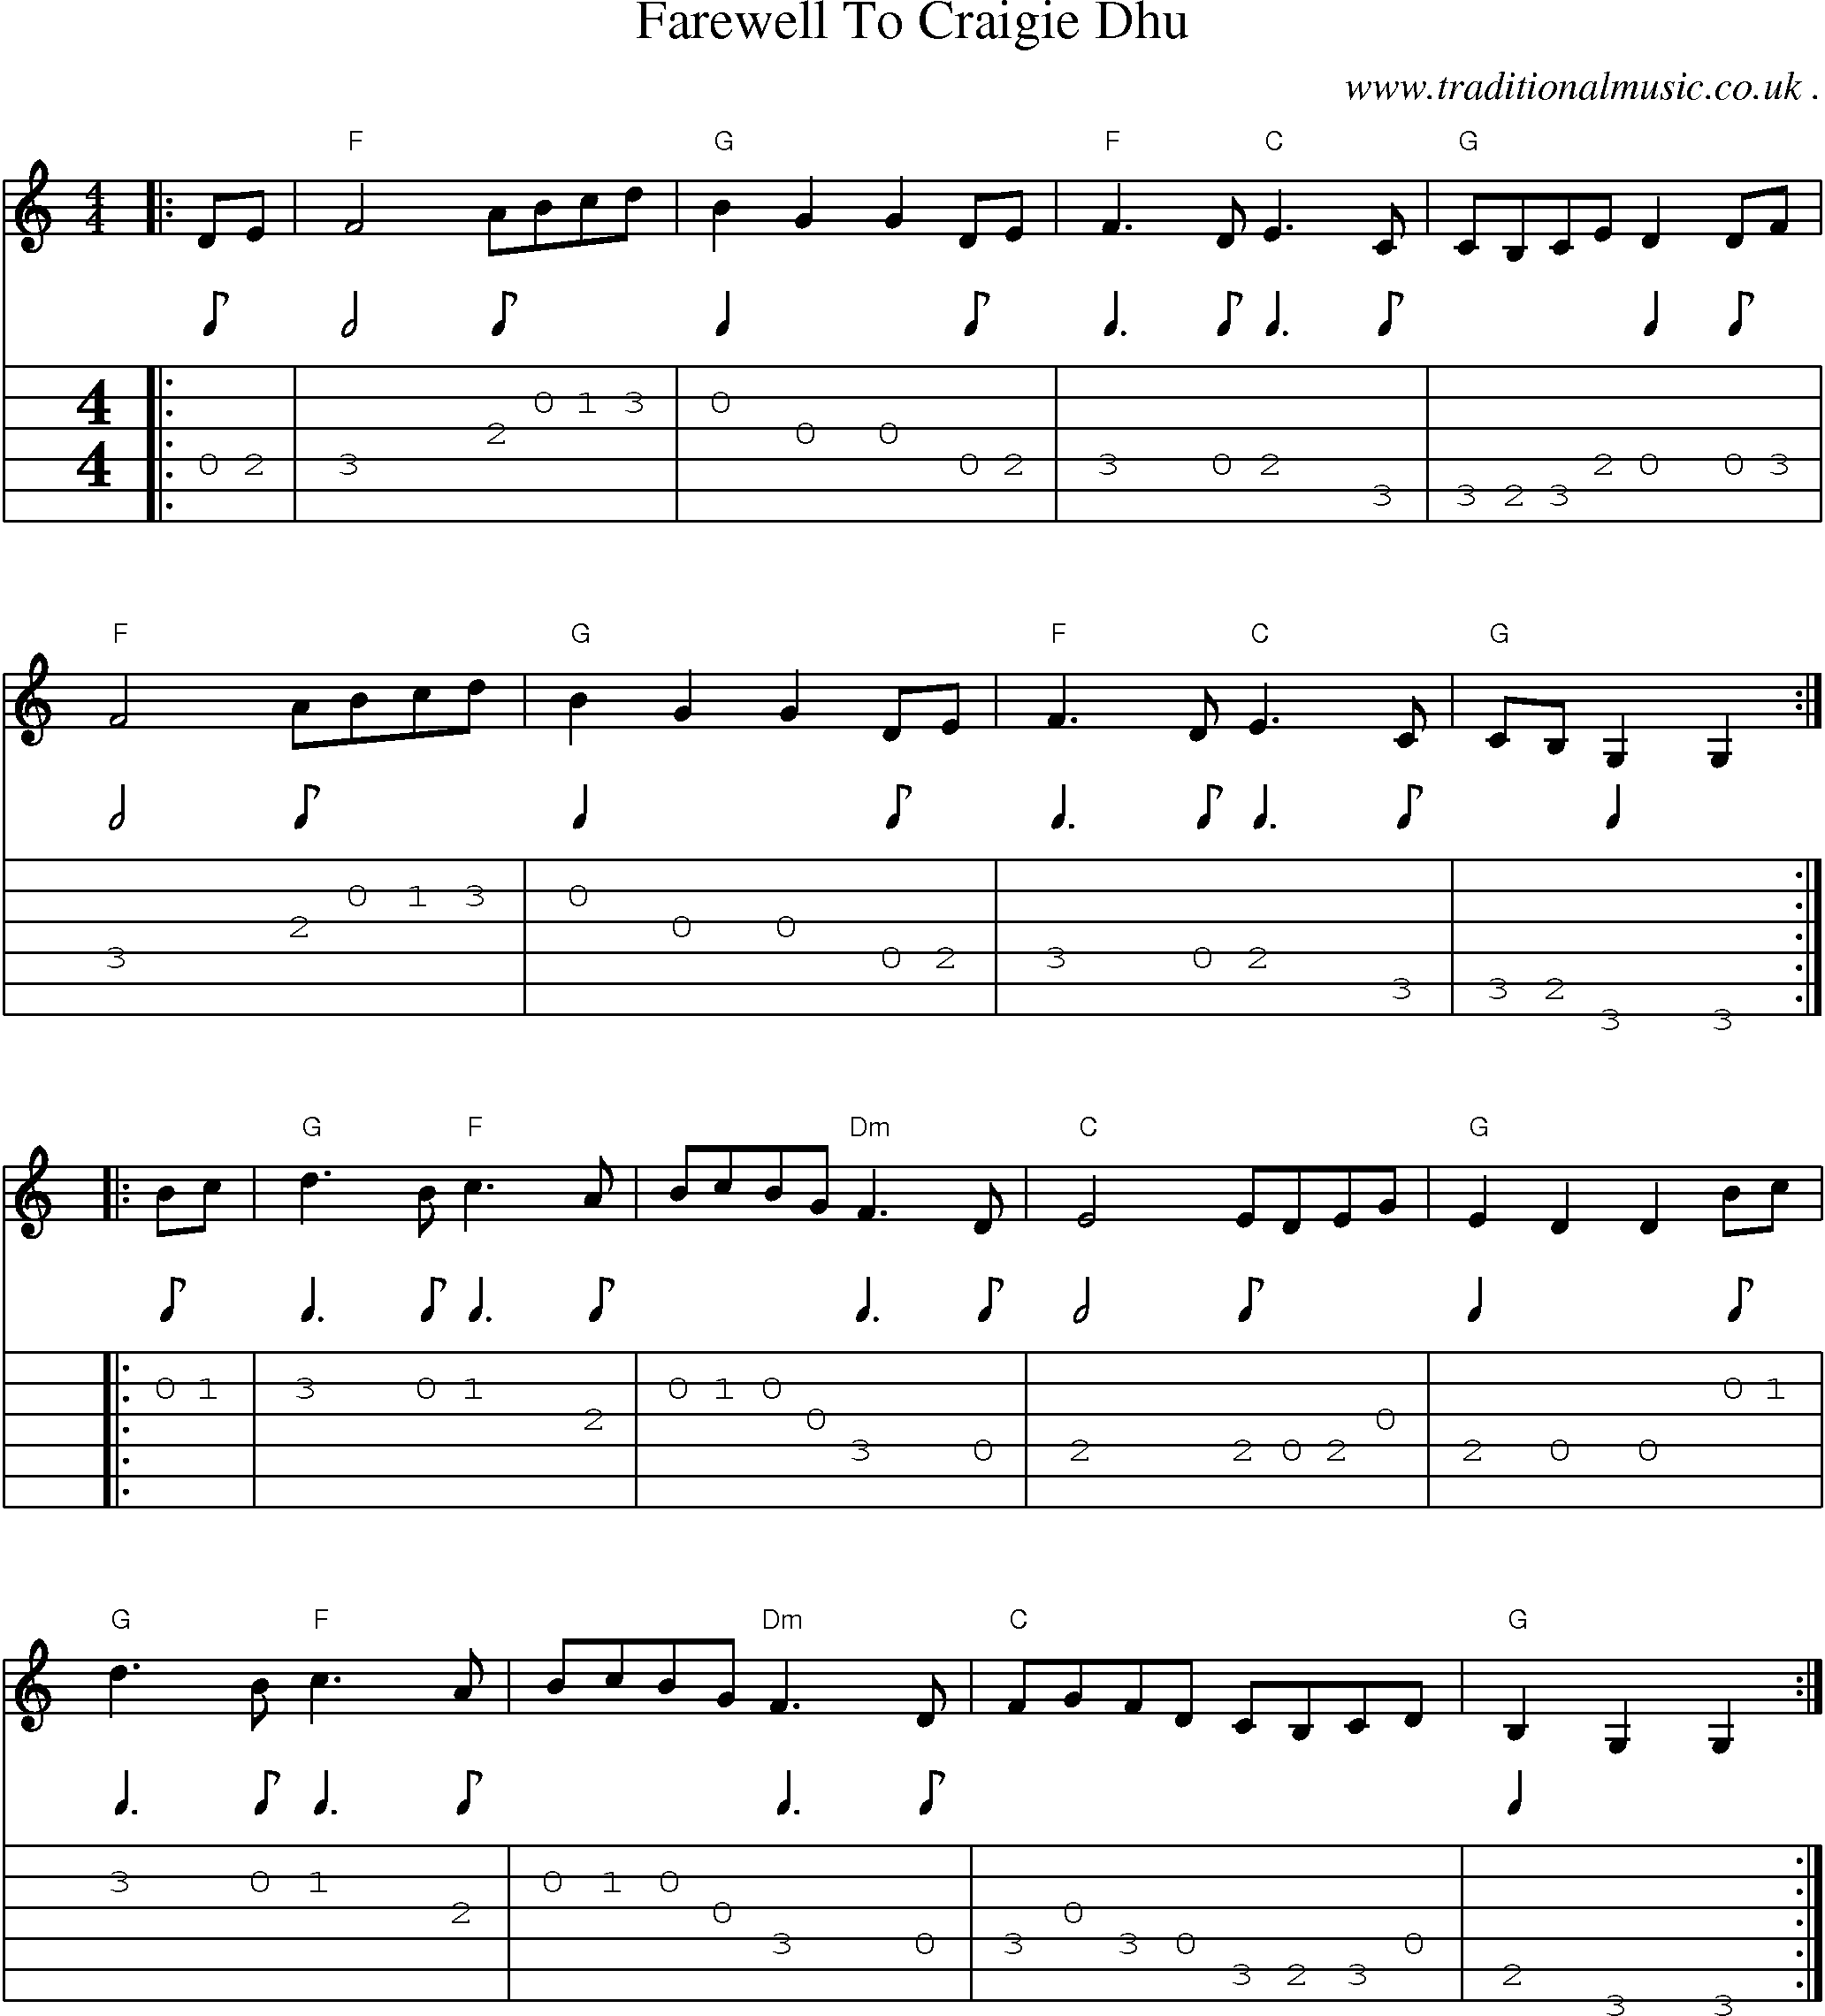 Sheet-Music and Guitar Tabs for Farewell To Craigie Dhu